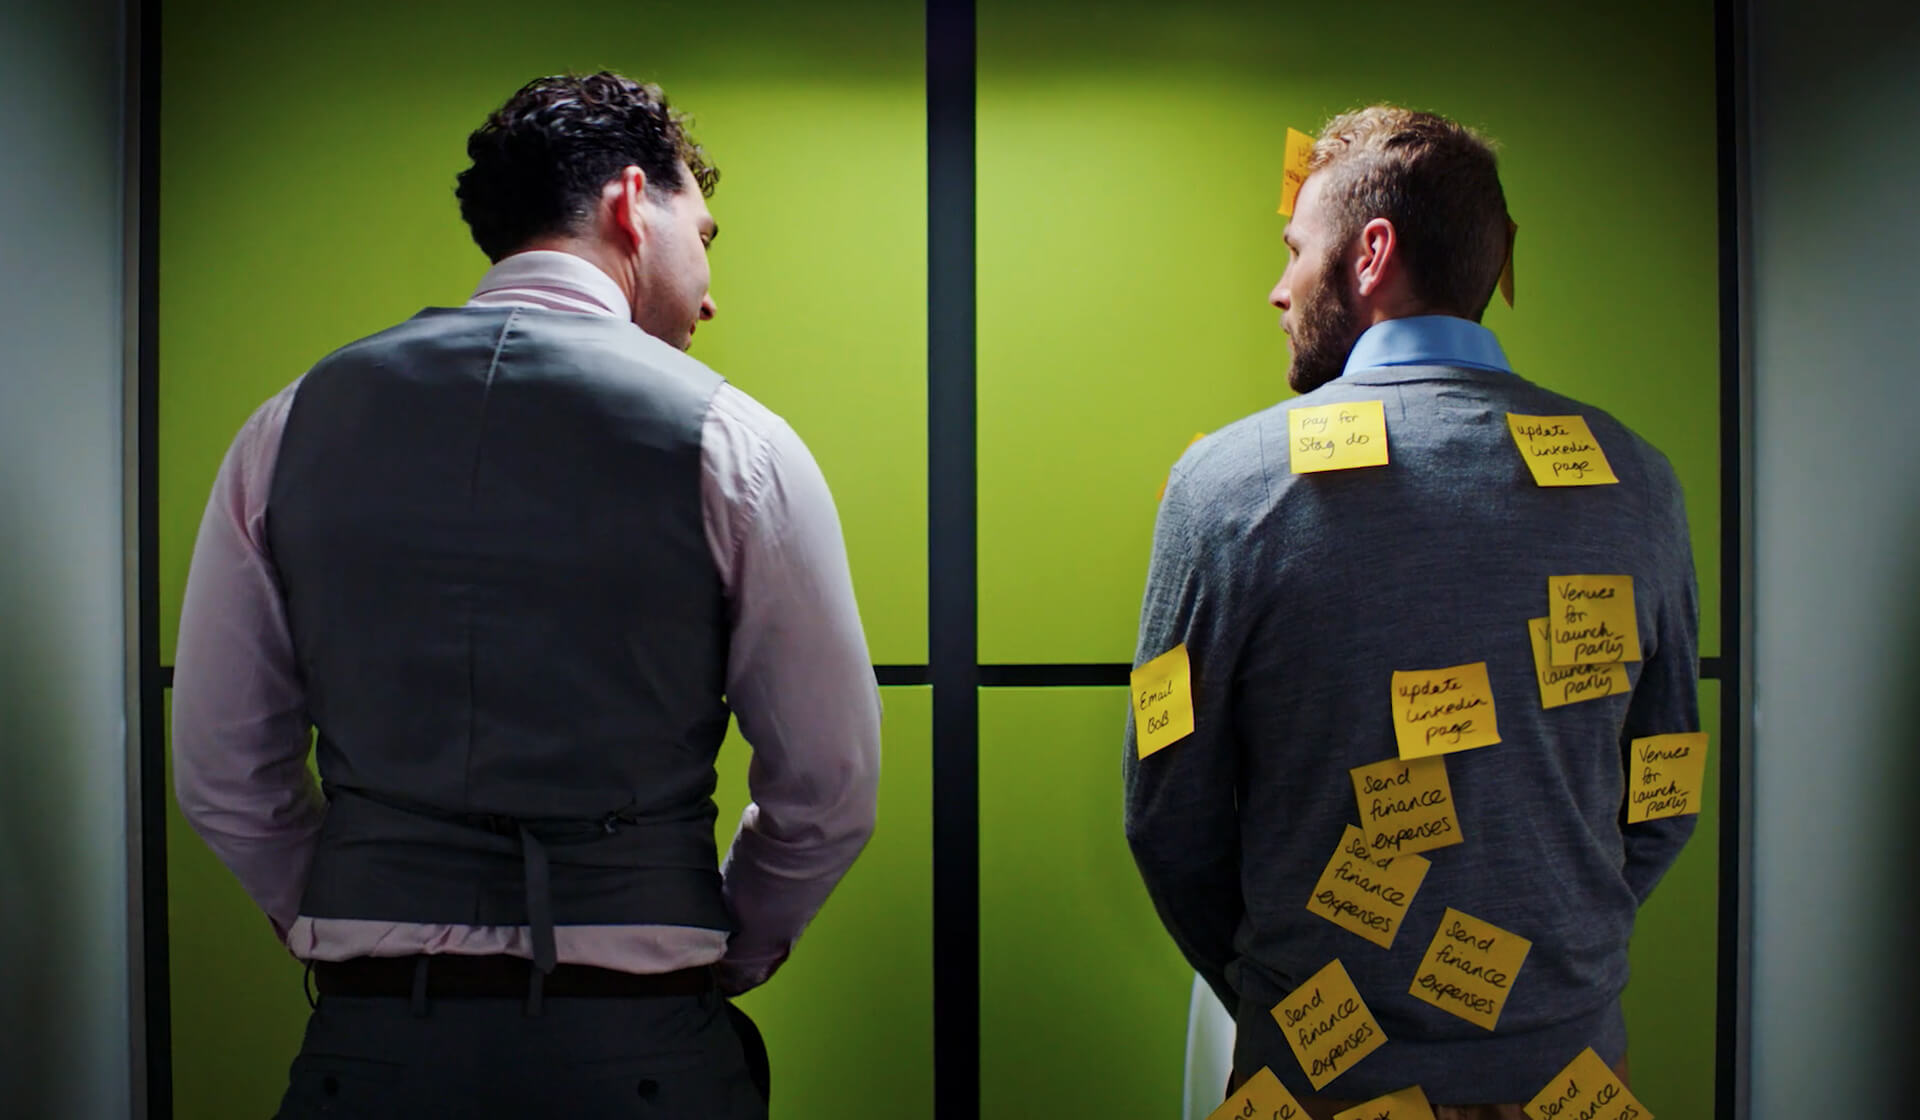 Get Shit Done - Sort It Out Martin - Mellor&Smith Man covered in sticky notes